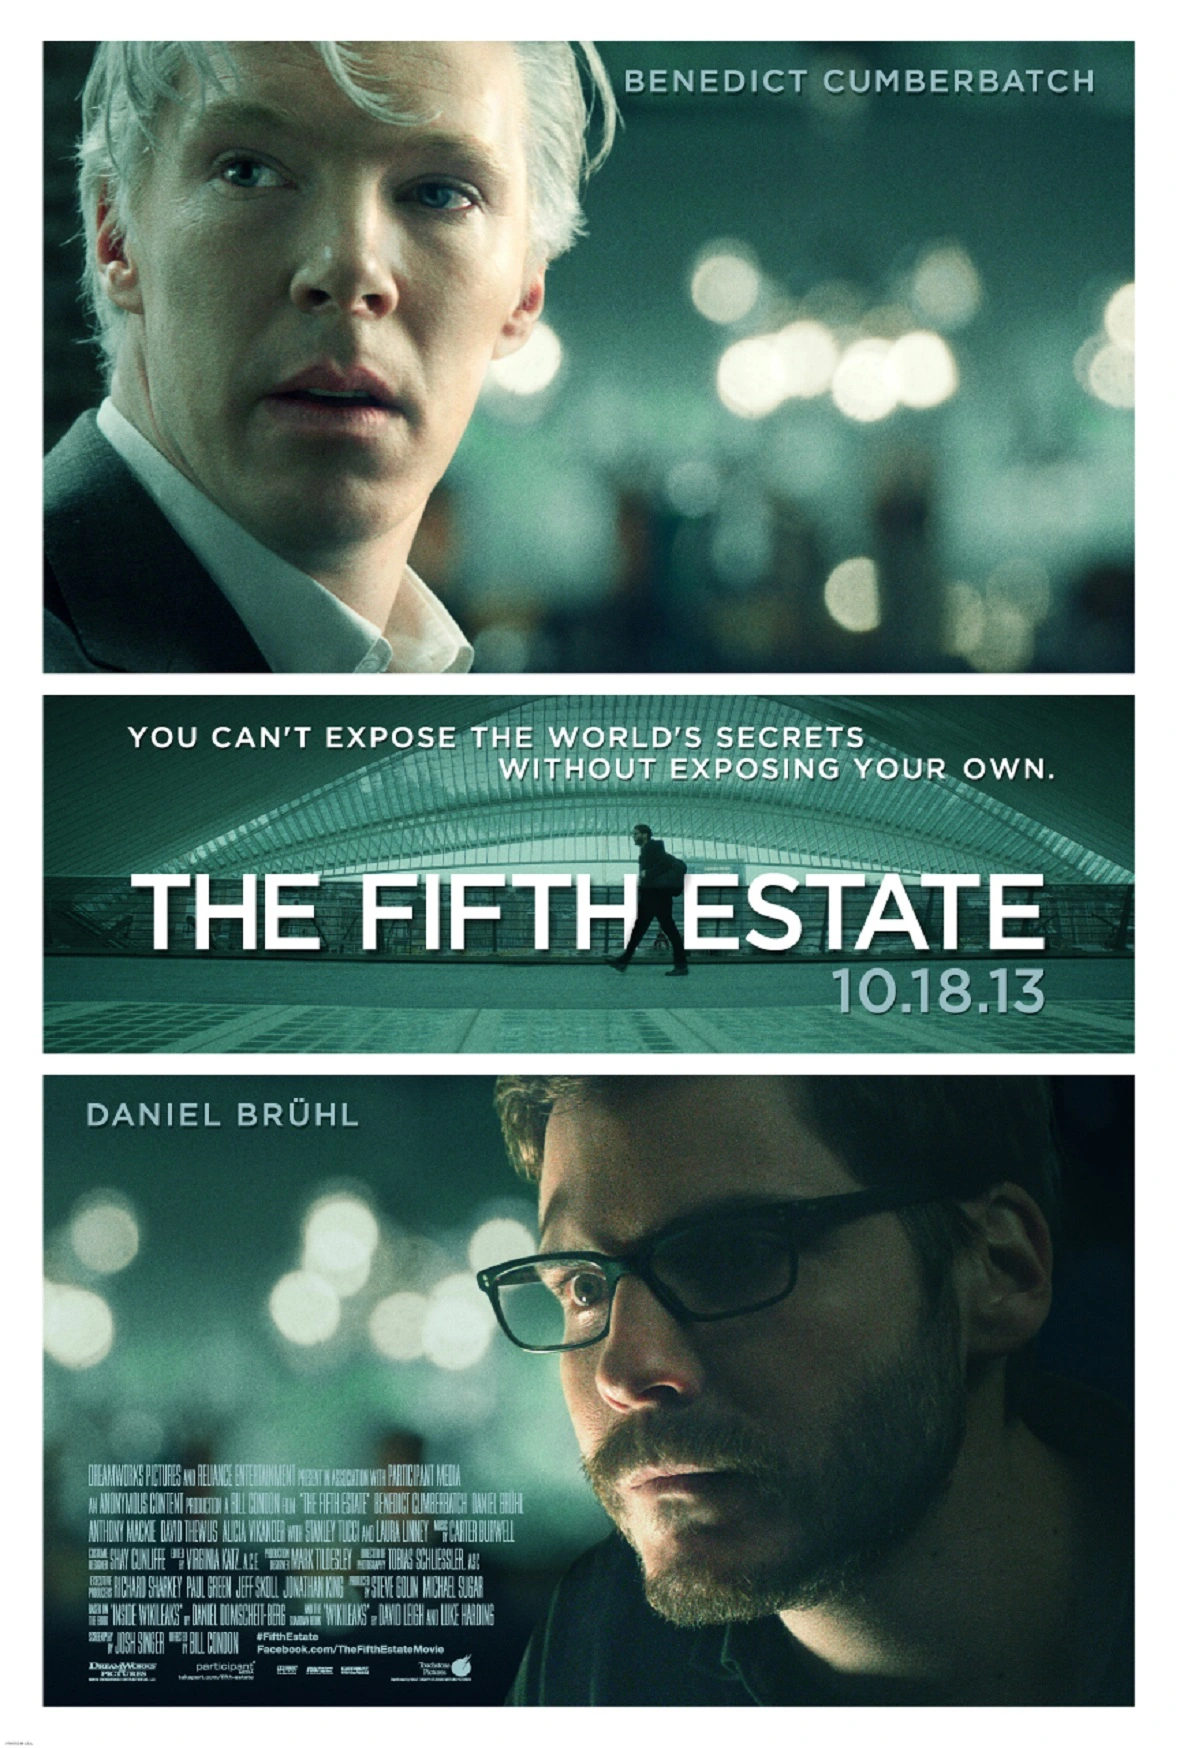 Image of the poster of The Fifth Estate.